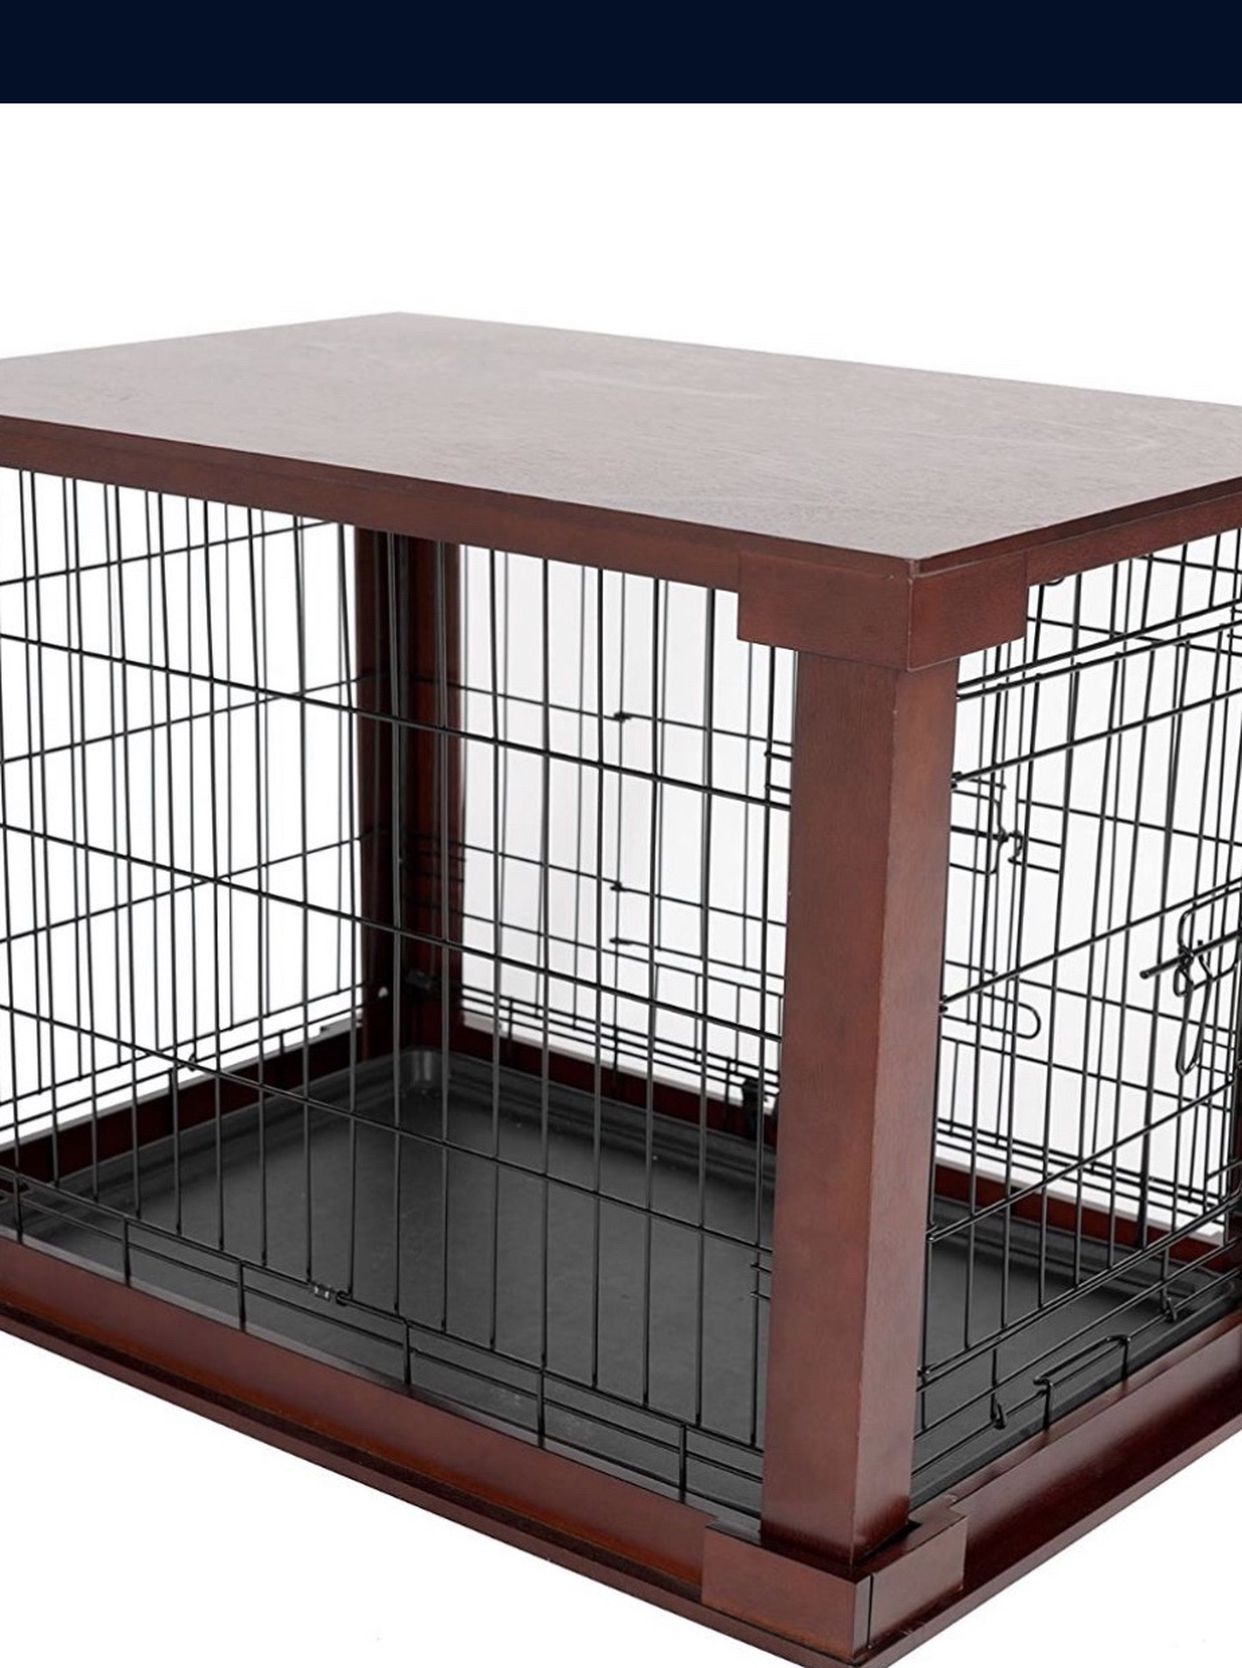 New In Box Dog Crate Home Kennel With Double Door With Metal And Wood Construction Base Size Small ( Medium Also Available )